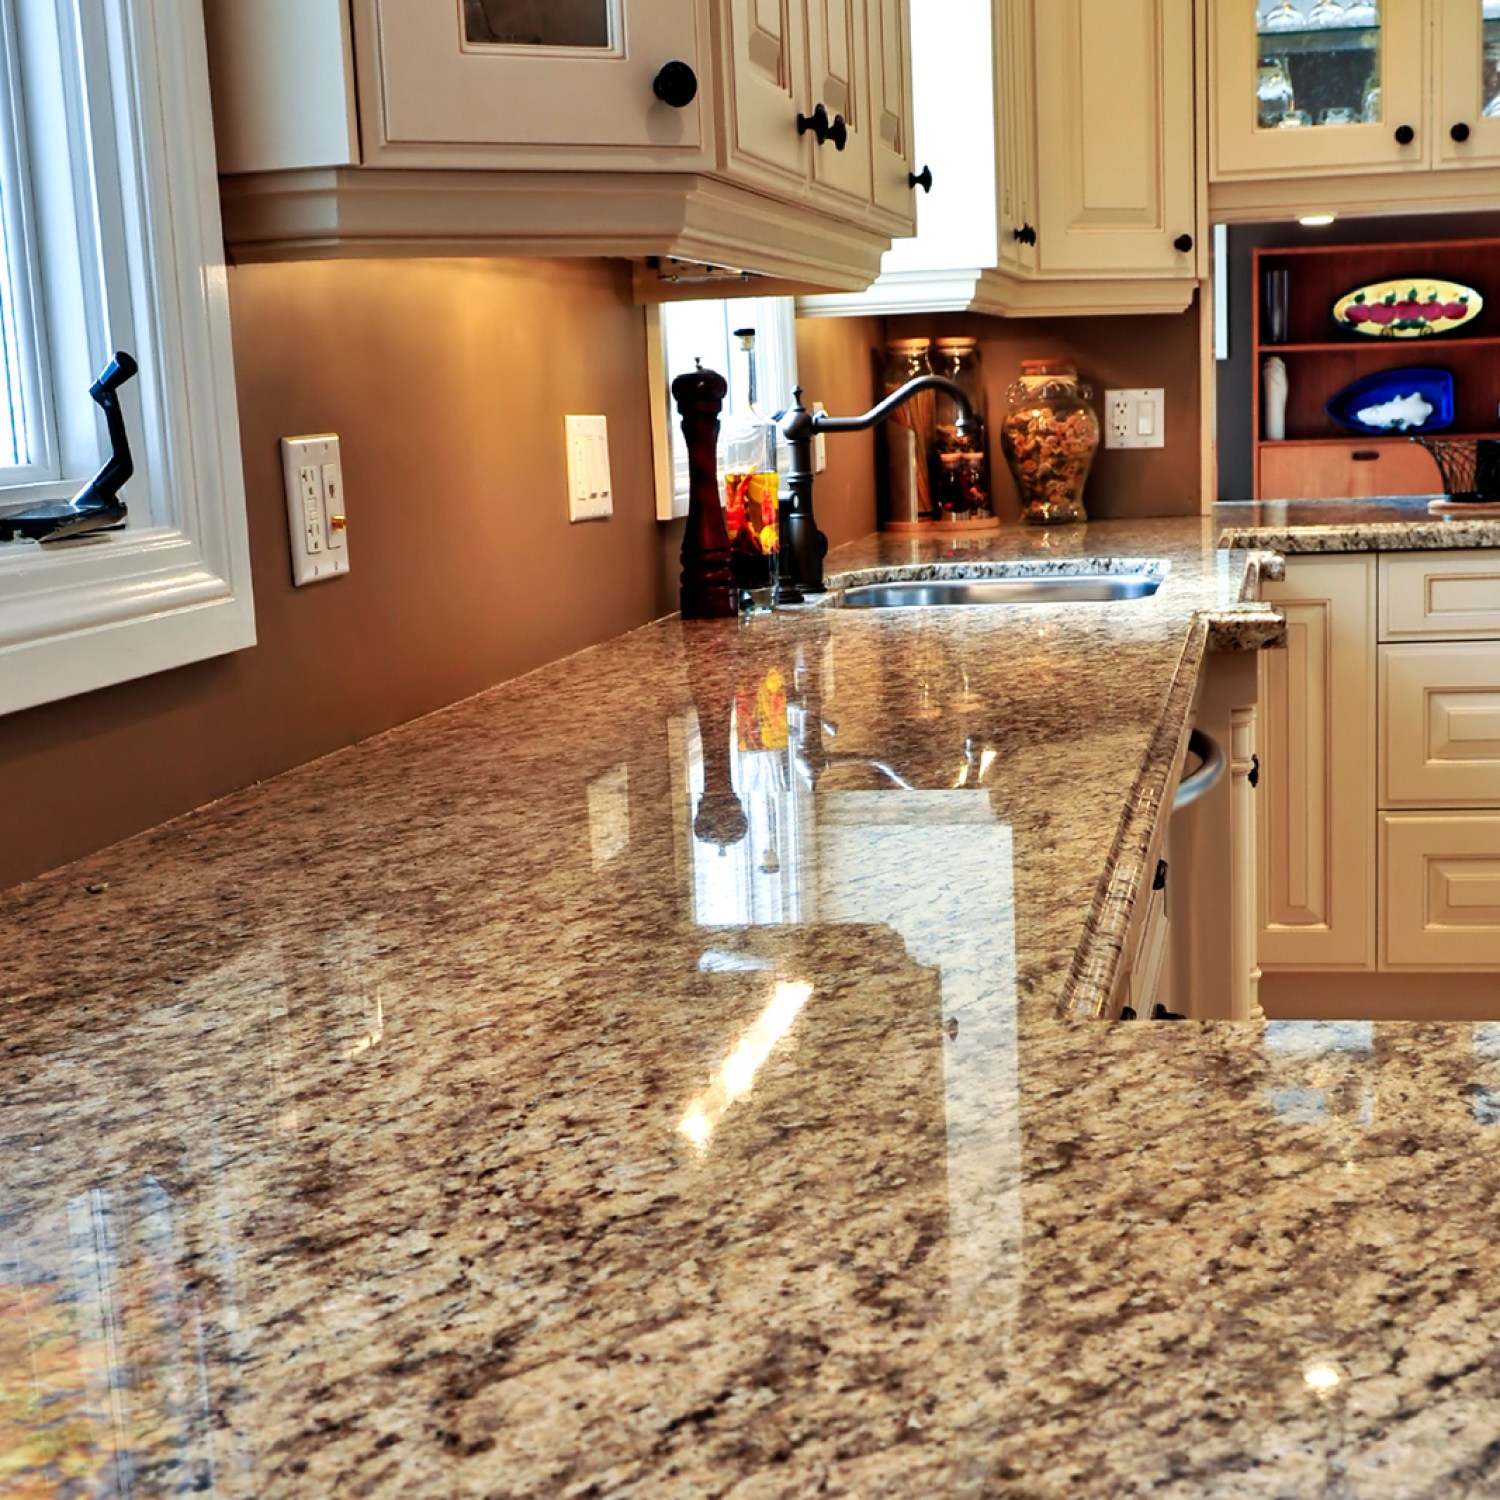 Repair Kitchen Countertop Scratches, How To Buff Out Scratches On Corian Countertops